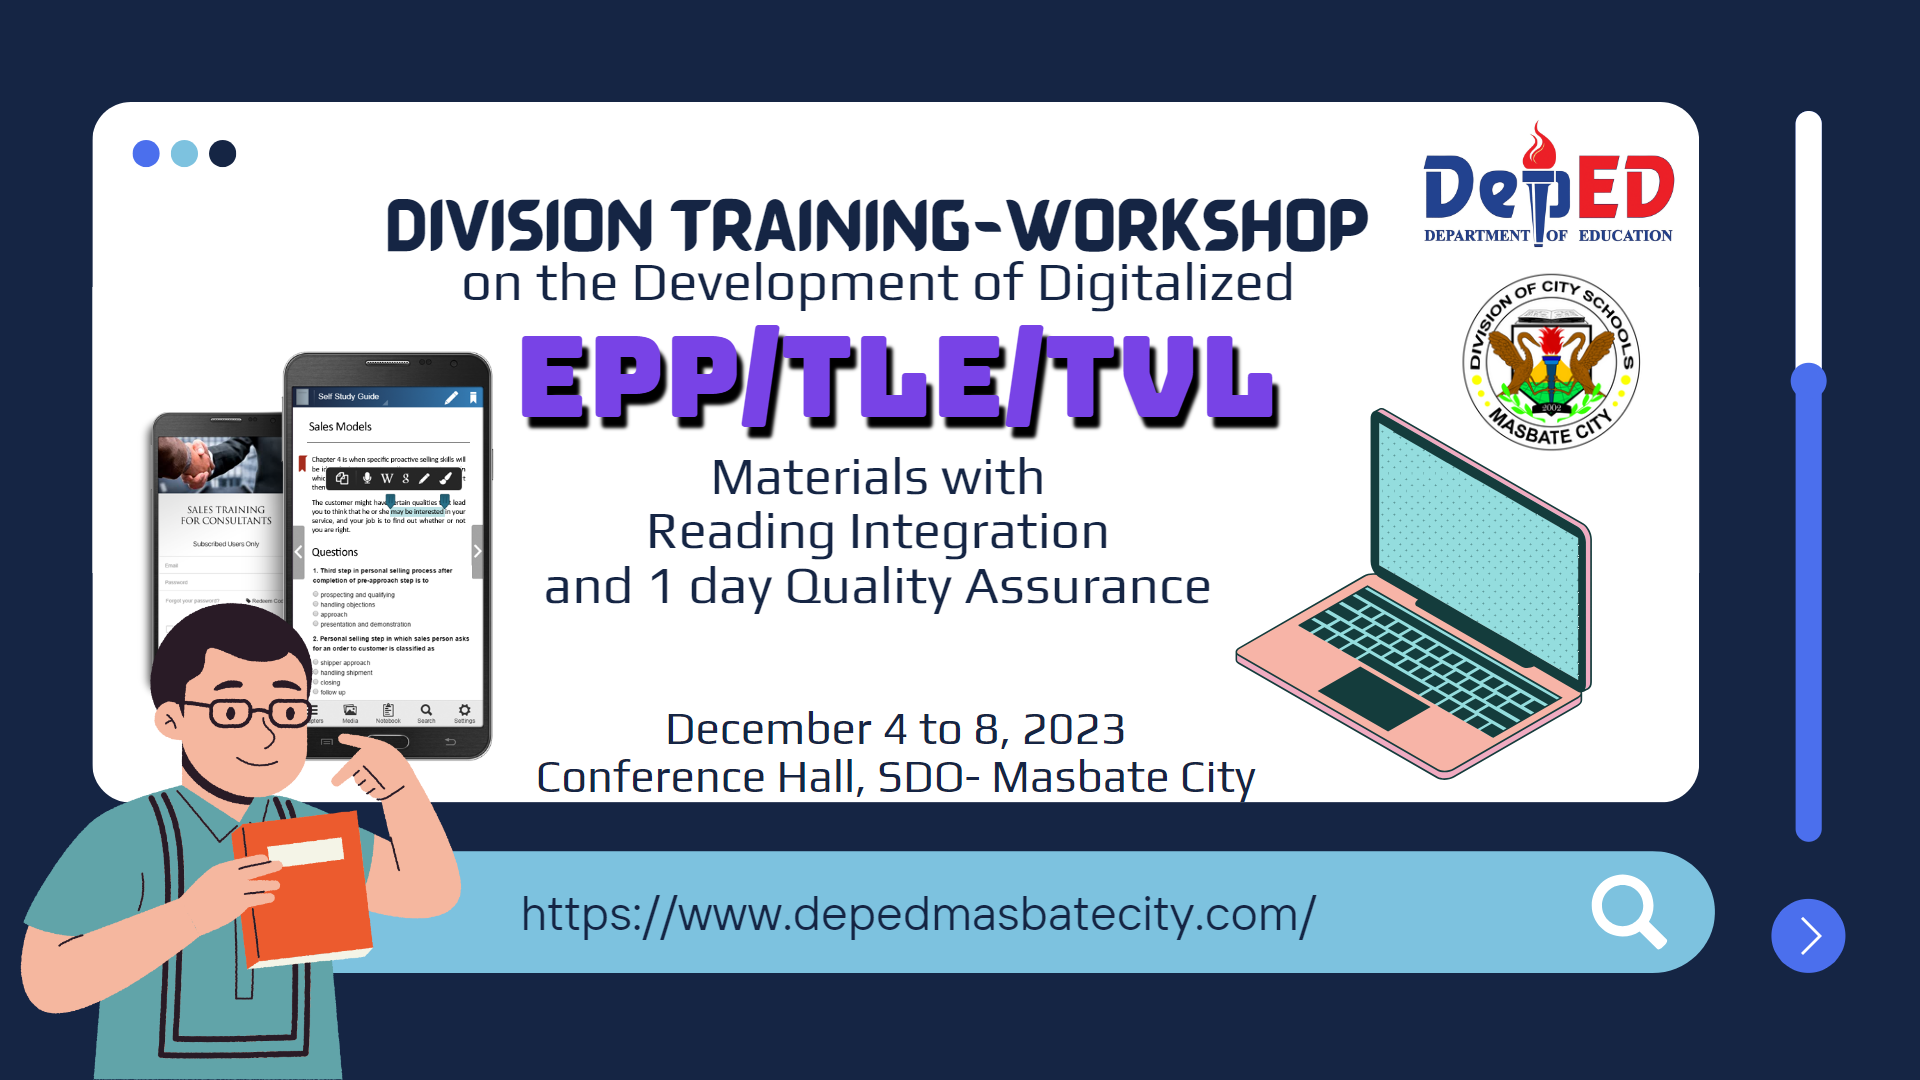 Division Training-Workshop on the Development of Digitized EPP/TLE/TVL Materials with Reading Integration